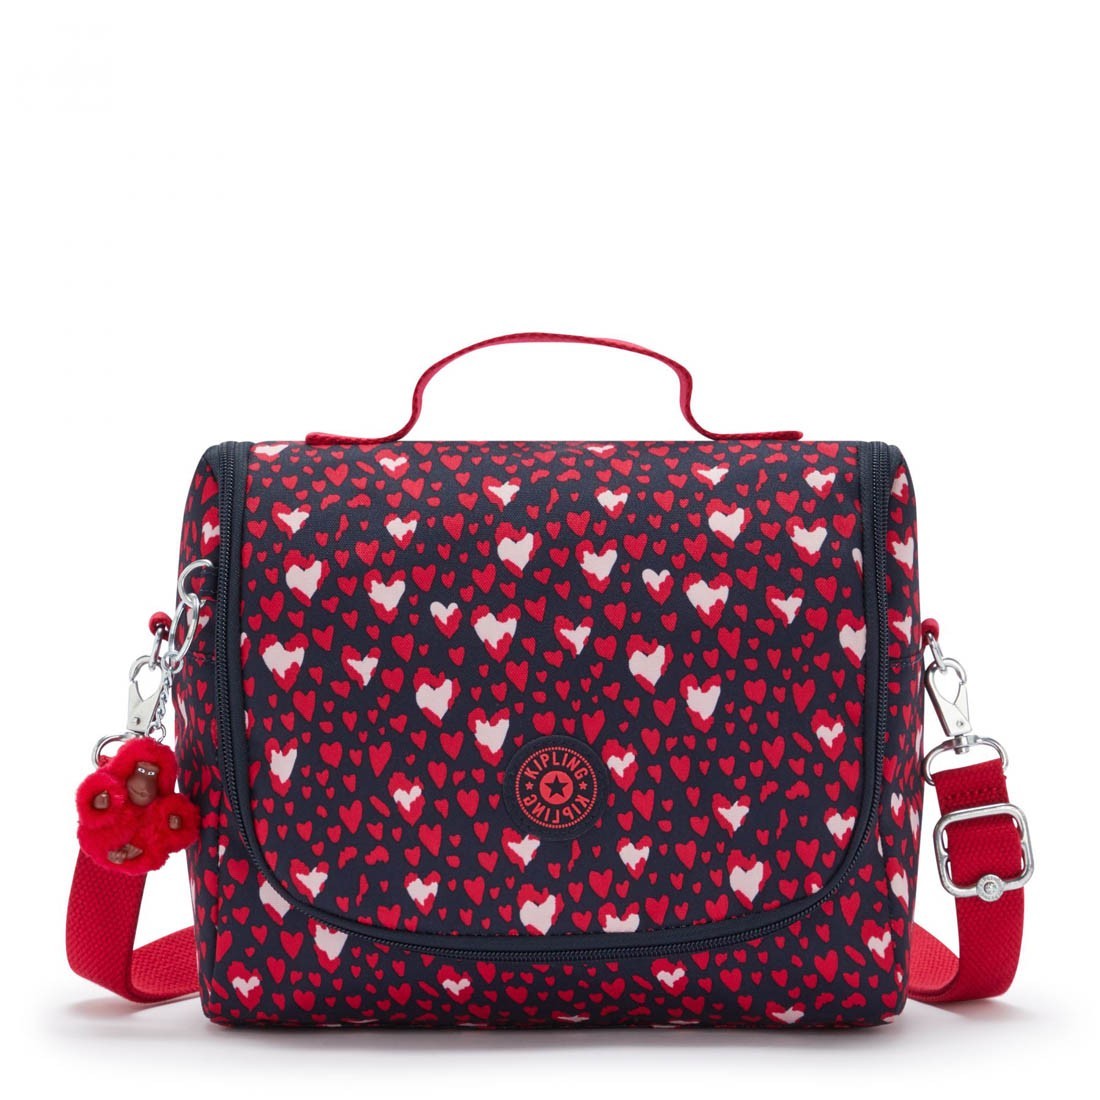 Shop Kipling NEW KICHIROU Heart Festival - Kipling, delivered to your home  | TheOutfit